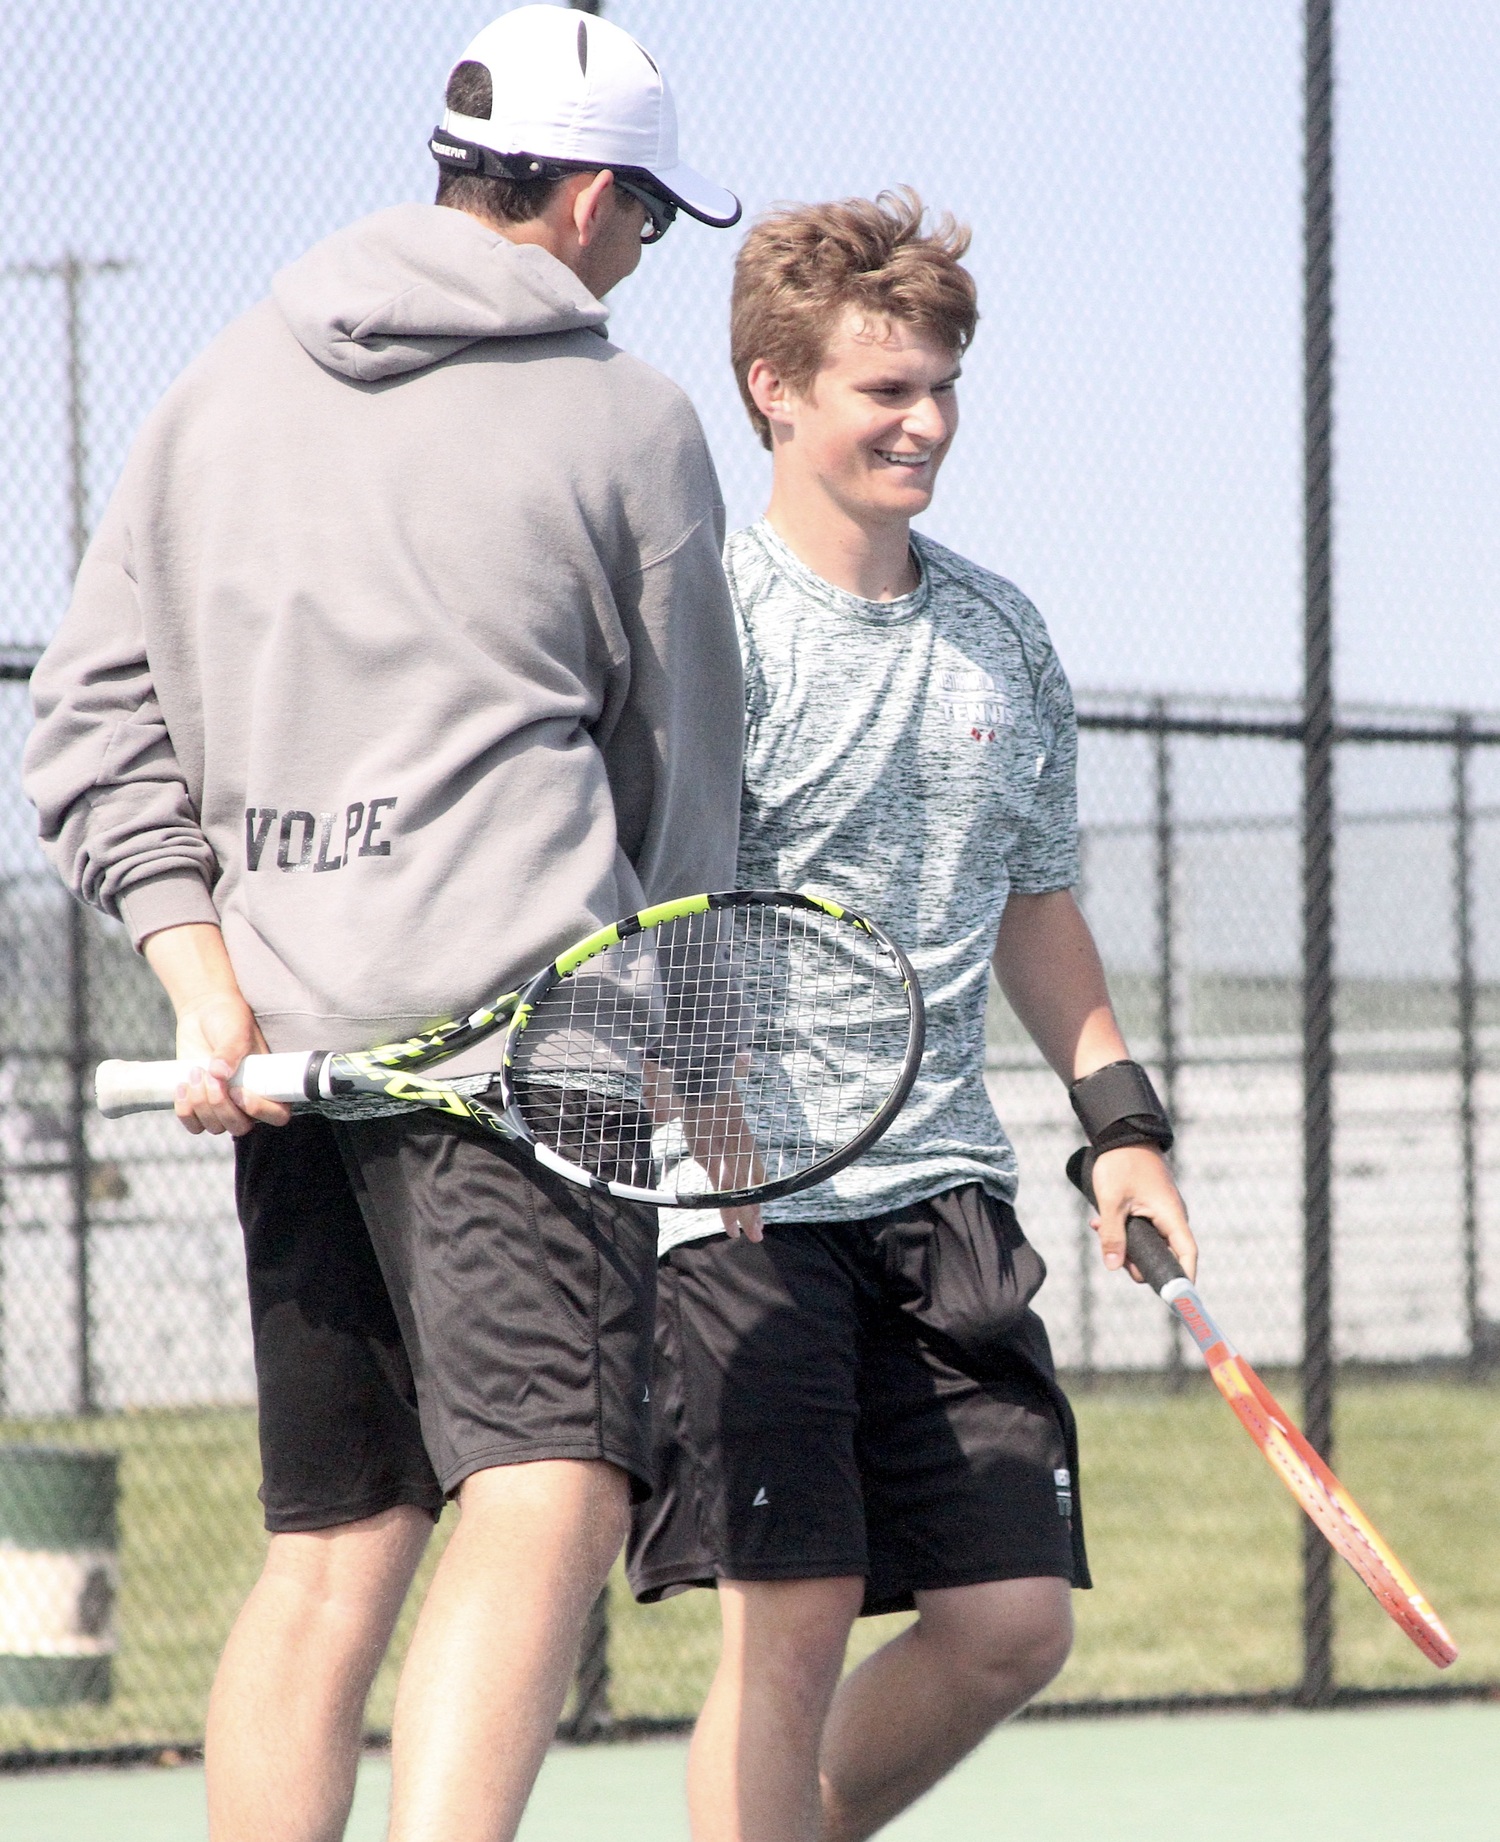 Sophomore Giancarlo Volpe and junior Bobby Stabile celebrate their Division IV doubles championship win. DESIRÉE KEEGAN